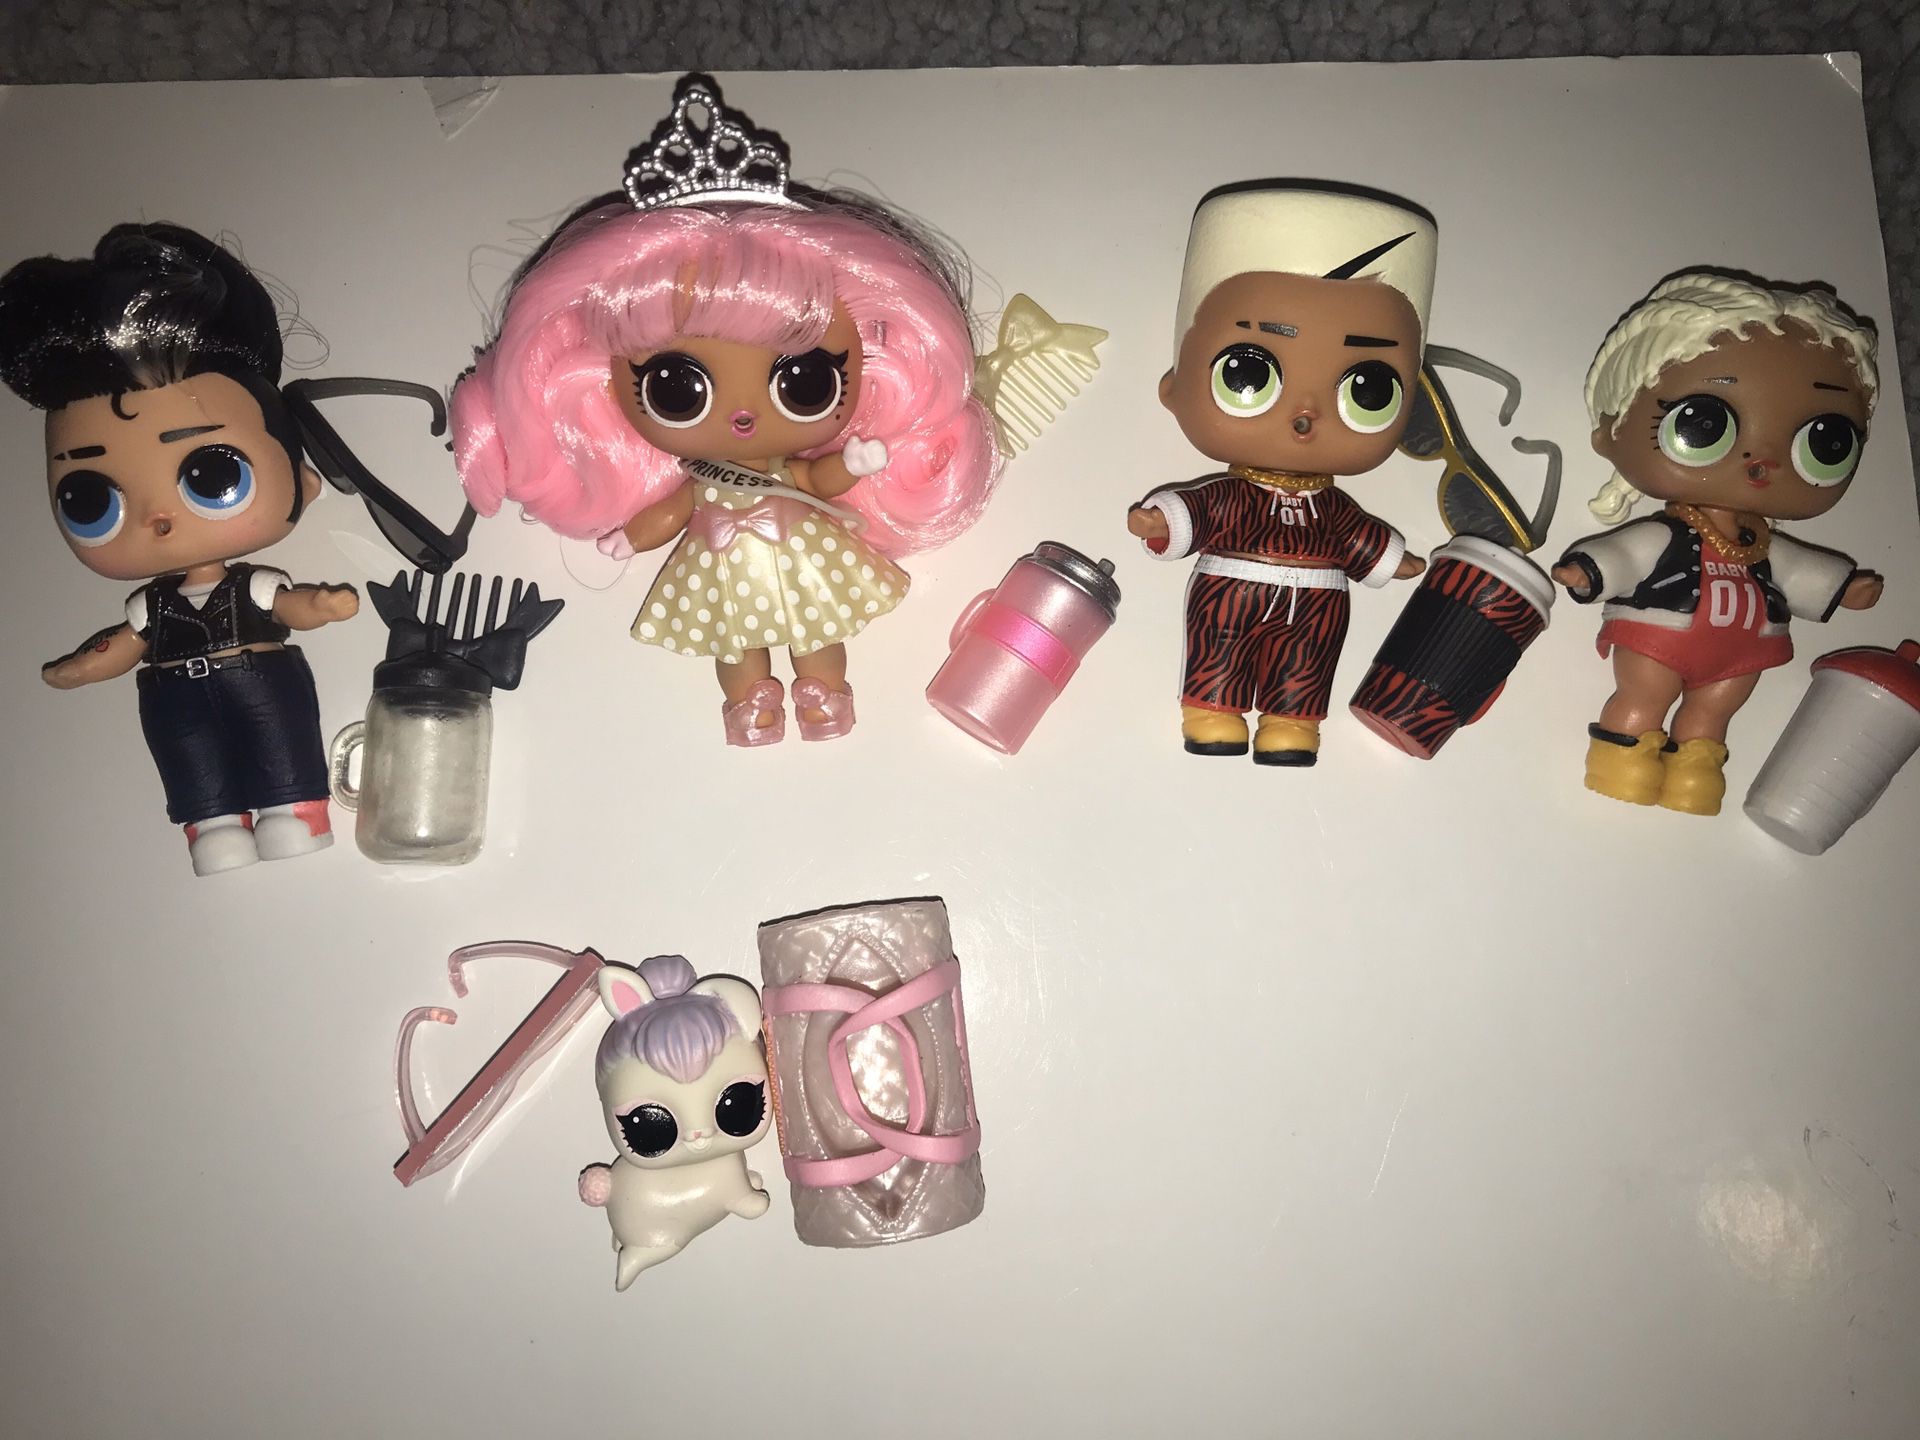 Lol Dolls lot of 5 “reserved for Jess”